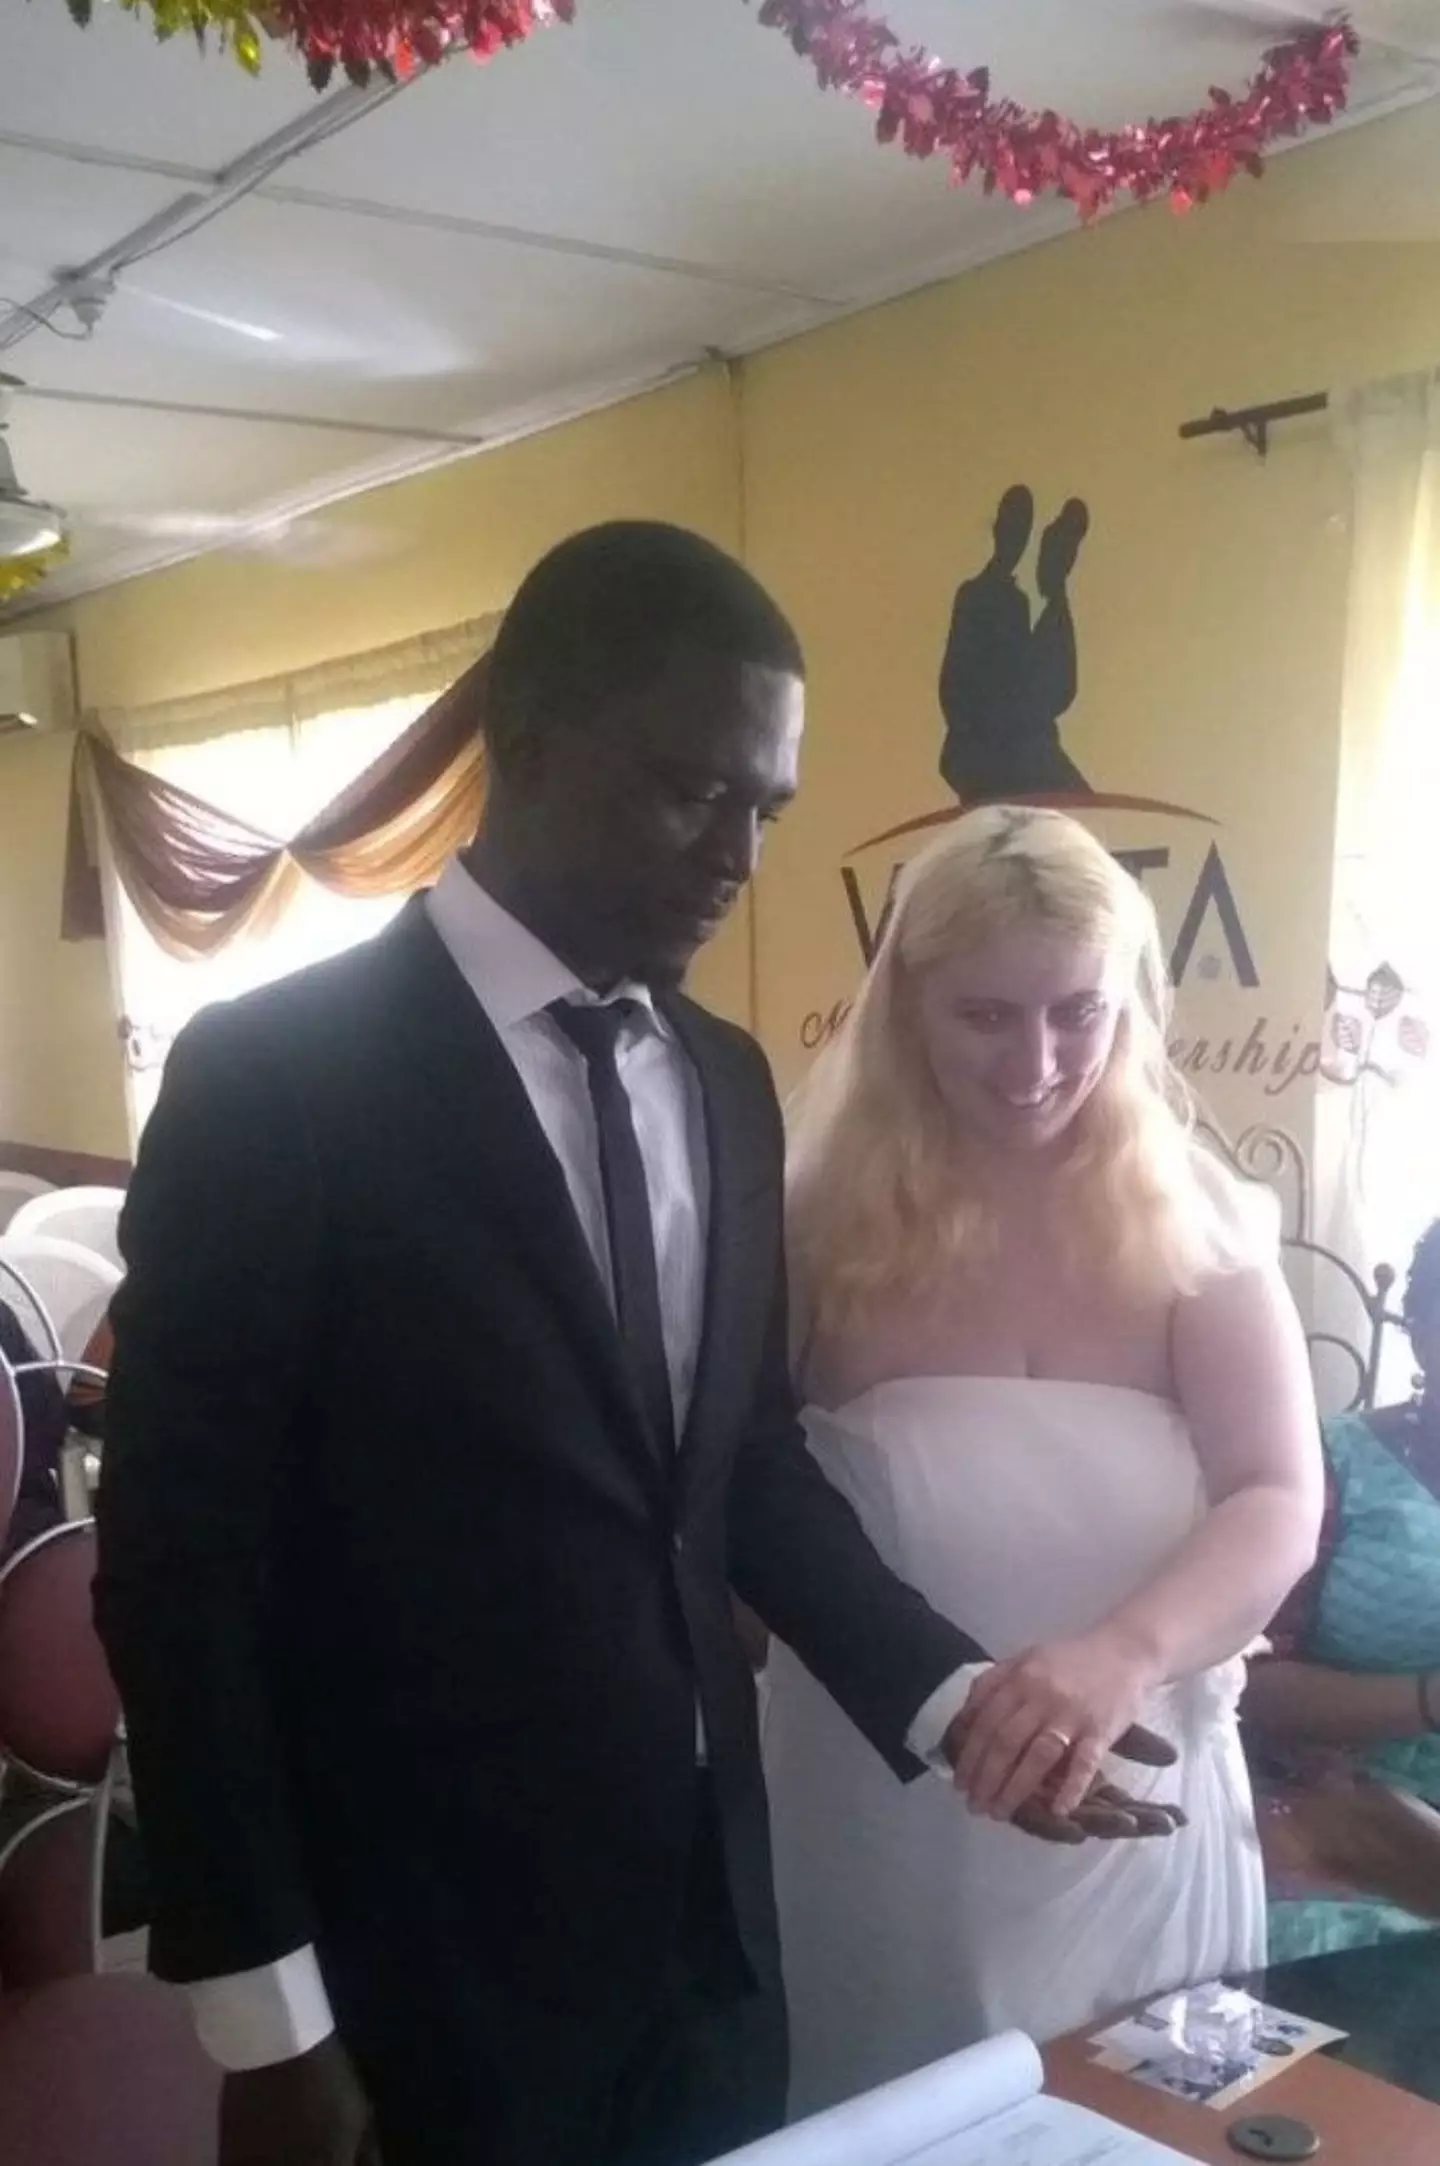 The couple married soon after meeting in person.